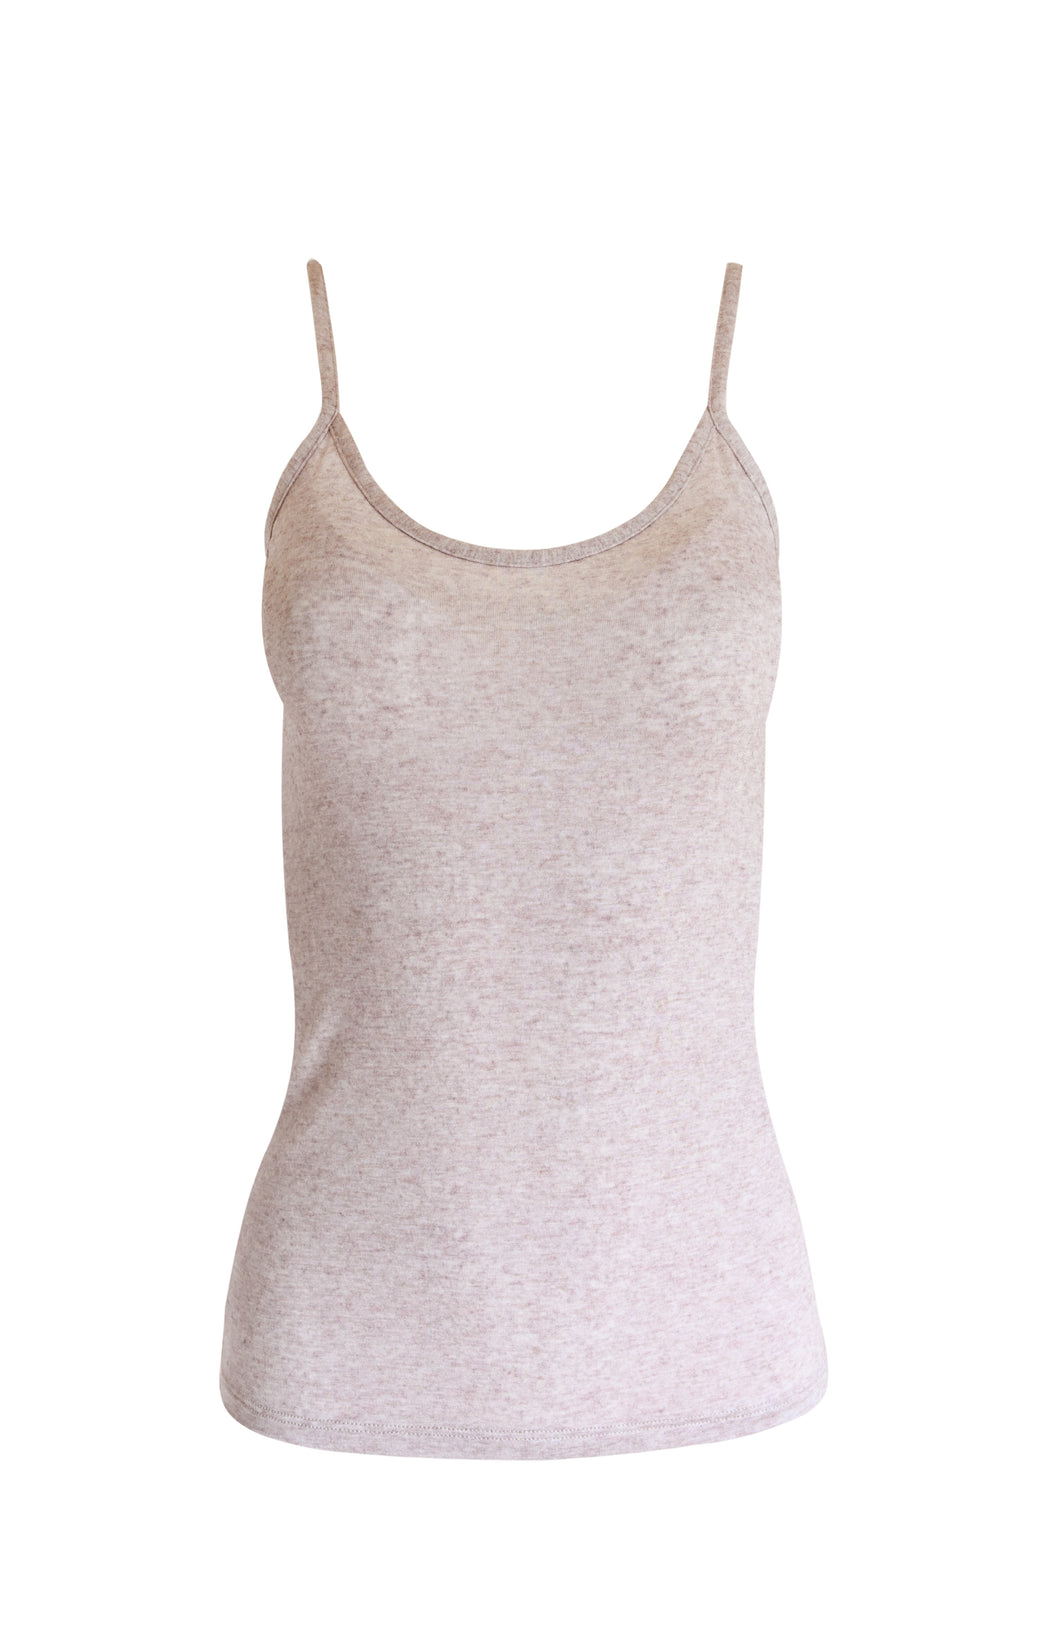 EGI Exclusive Collections Women's Modal Cashmere Blend Cami. Proudly Made in Italy.